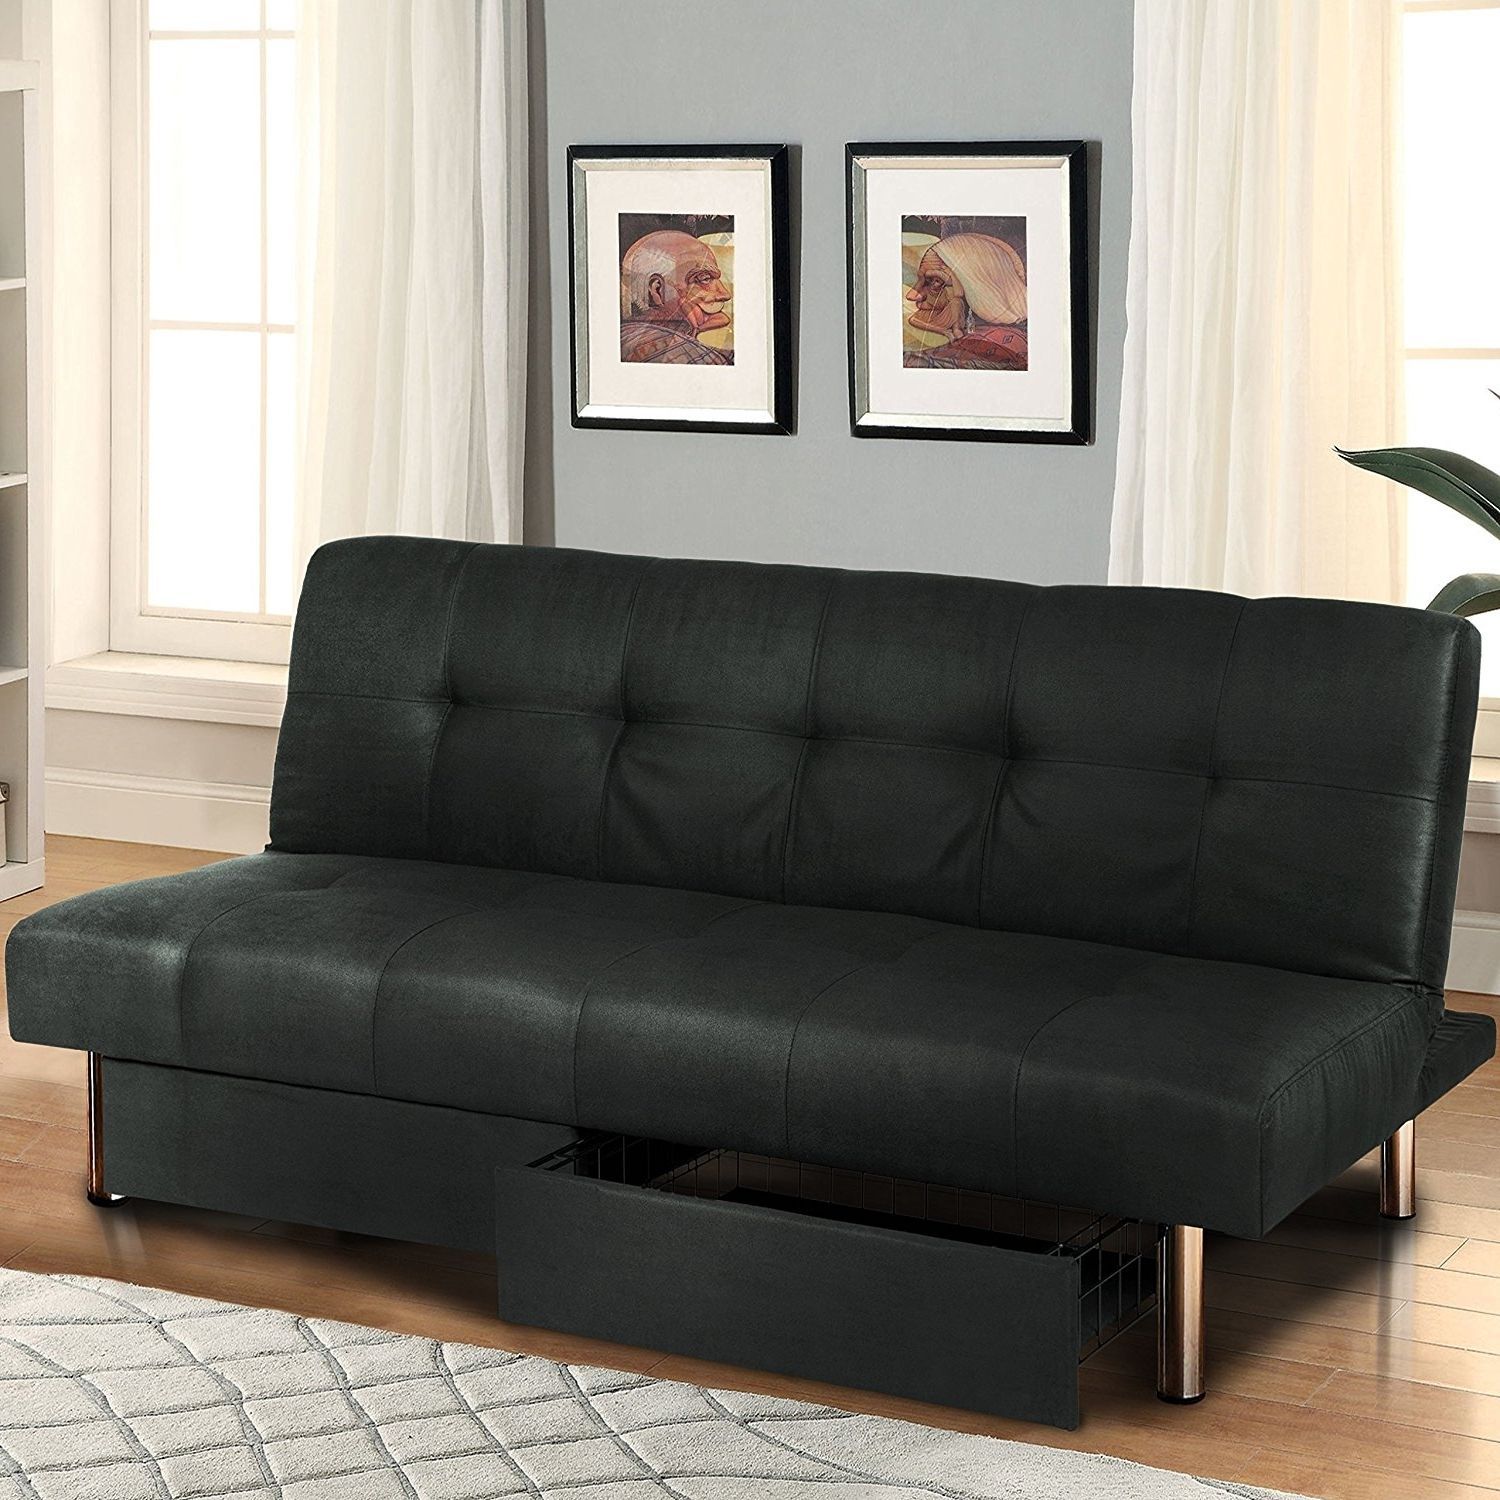 Queen Size Convertible Sofa Bed Ideas On Foter Regarding Queen Size Convertible Sofa Beds (View 11 of 20)